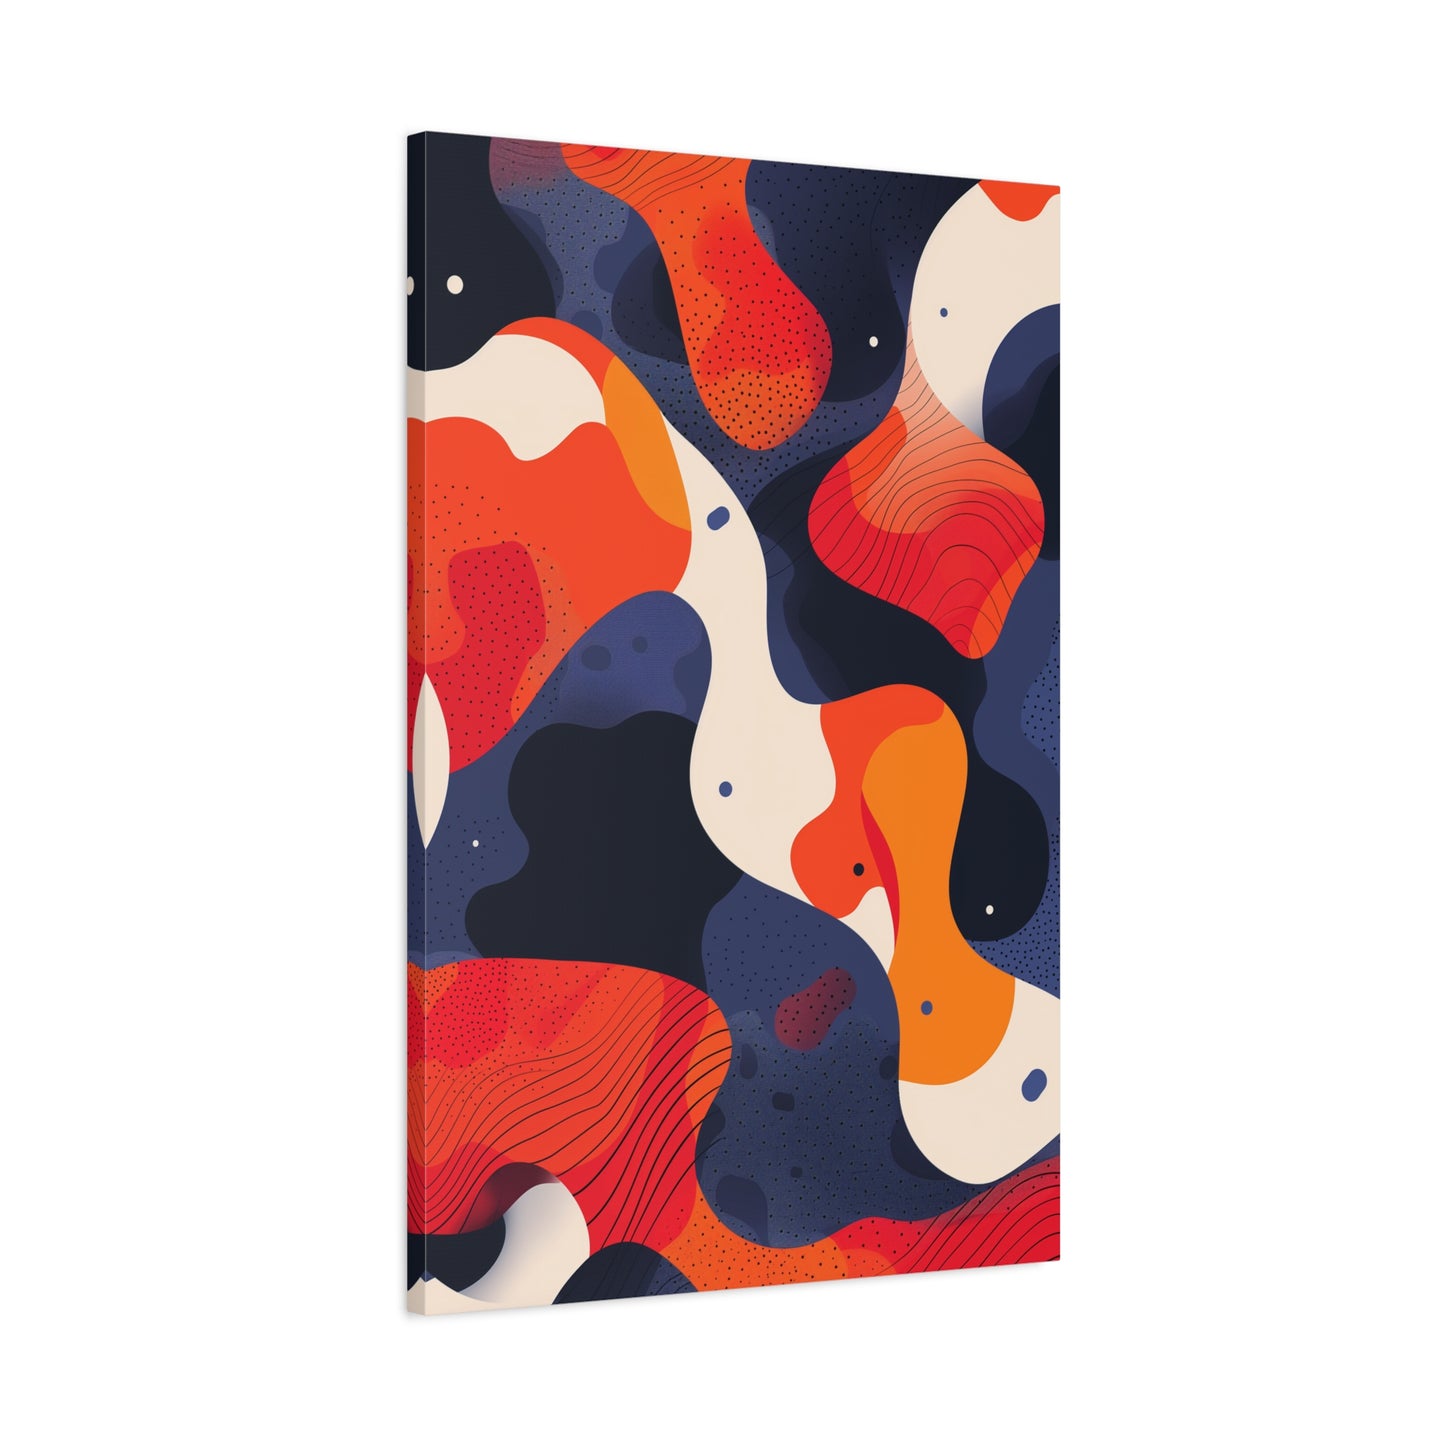 Colorflow Canvas (Canvas)Abstract flowing shapes in a bold color palette canvas print. Shop now for innovative products designed to enhance your digital lifestyle. Fast shipping!RimaGallery